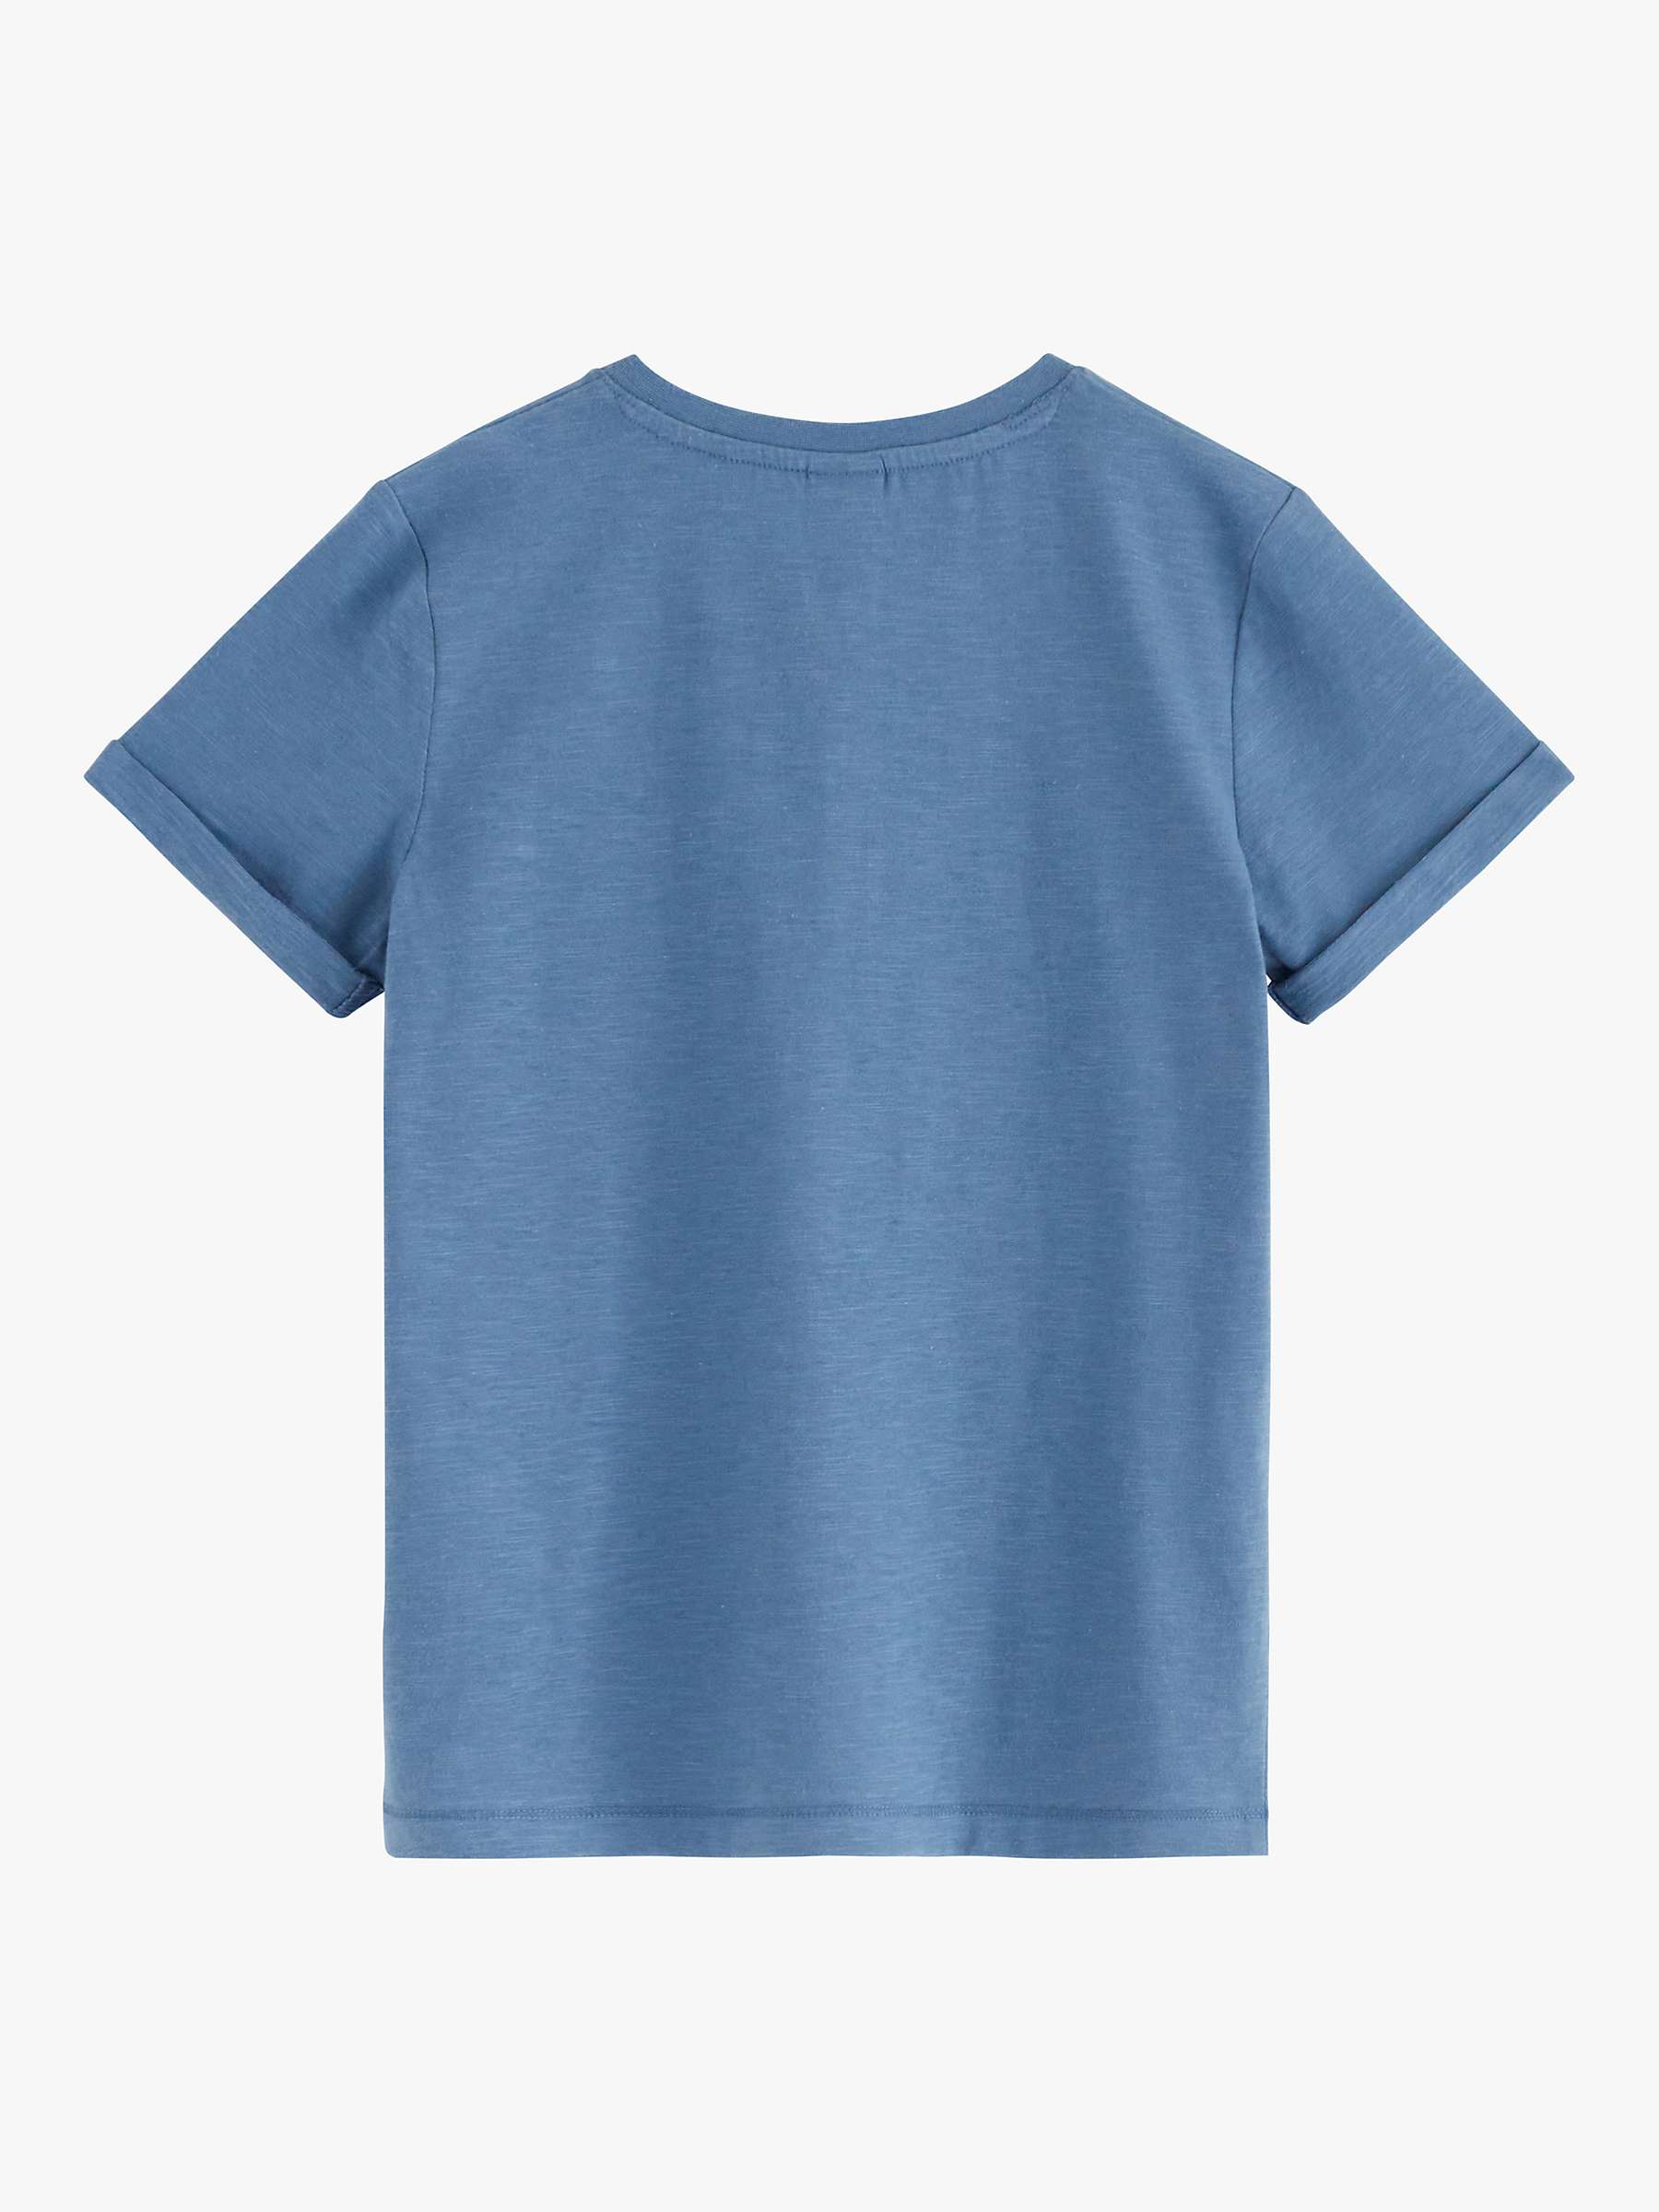 Buy Lindex Kids' Organic Cotton Essential Short Sleeved Button Top, Dusty Blue Online at johnlewis.com